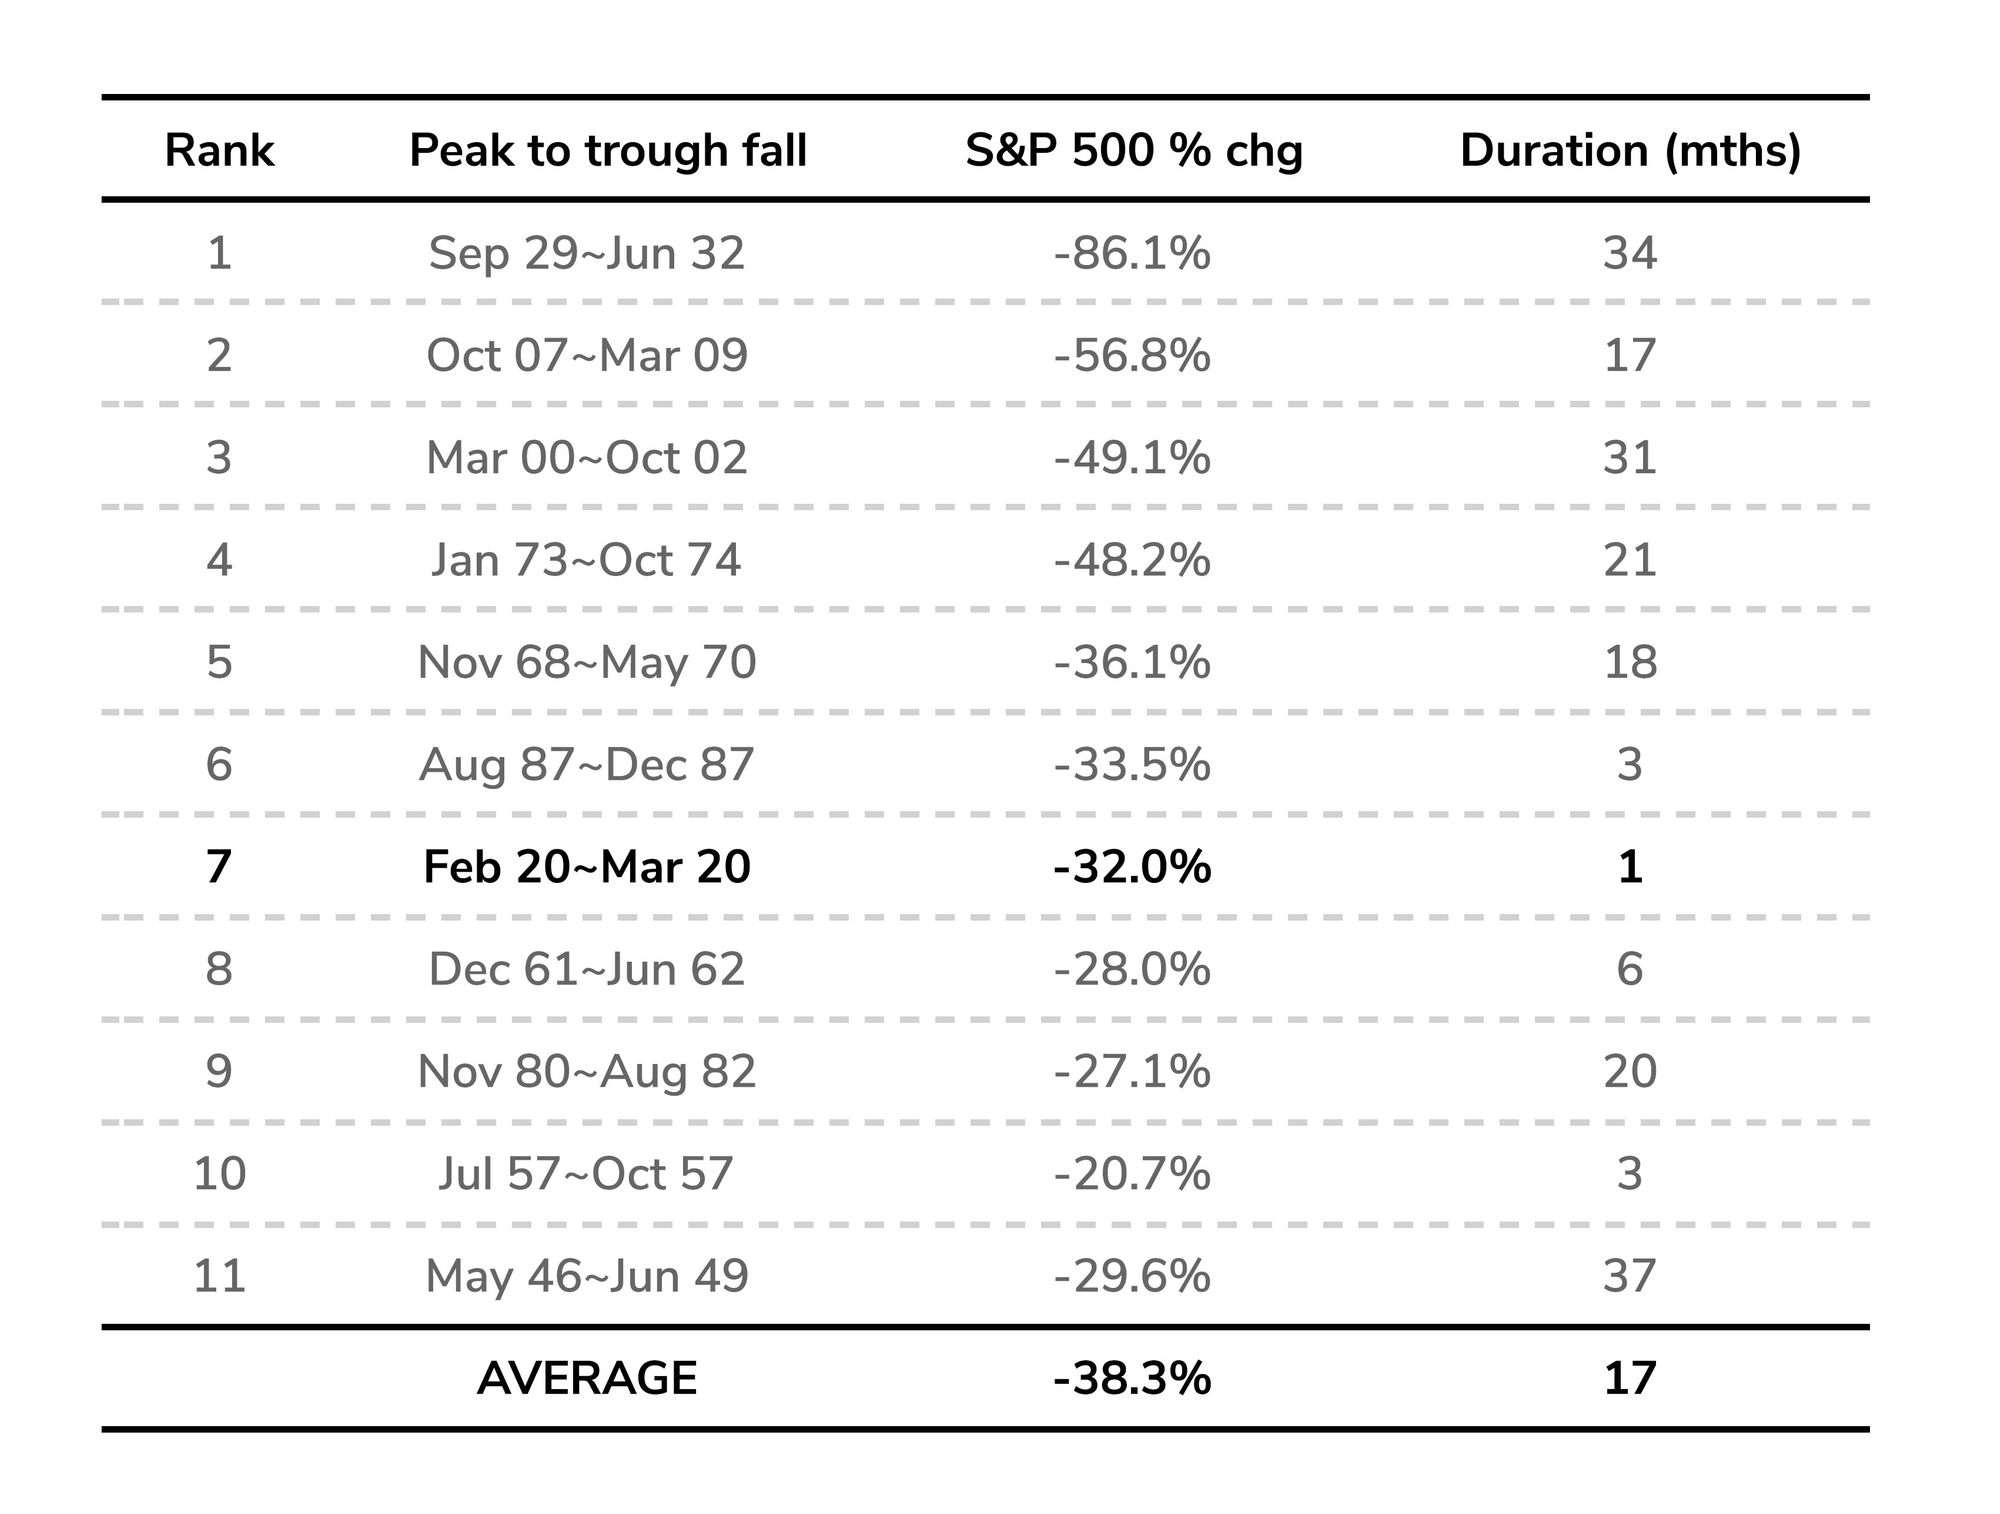 Historical corrections of the S&P 500 Index